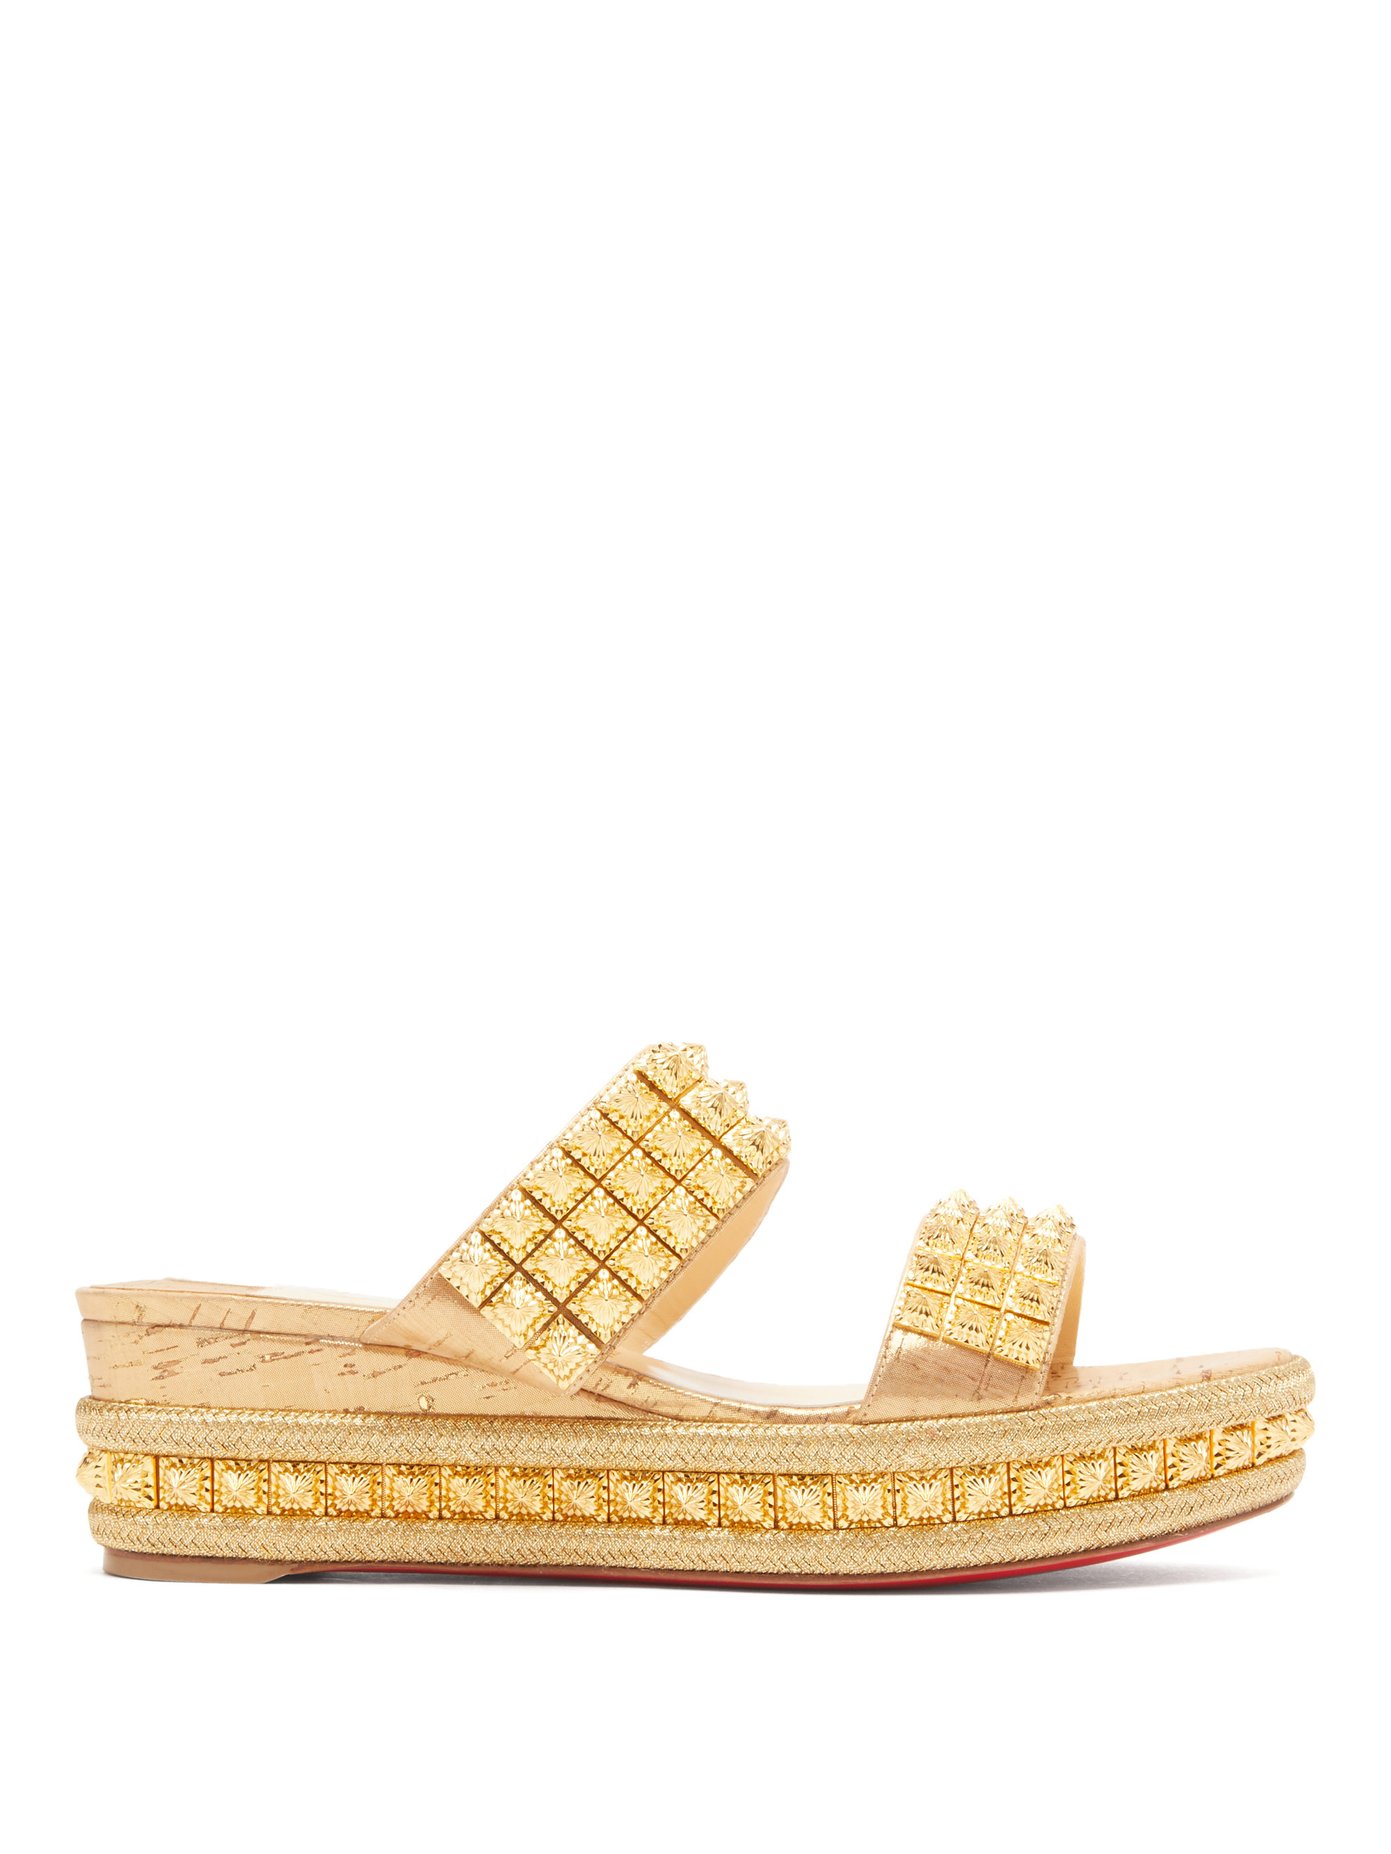 christian louboutin gold wedges